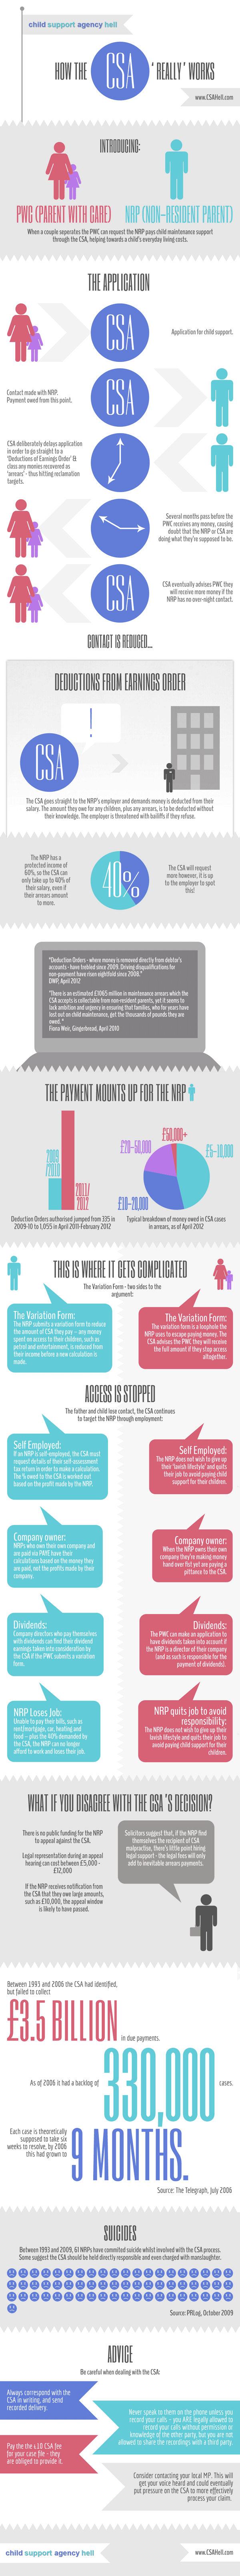 The Child Support Agency Infographic